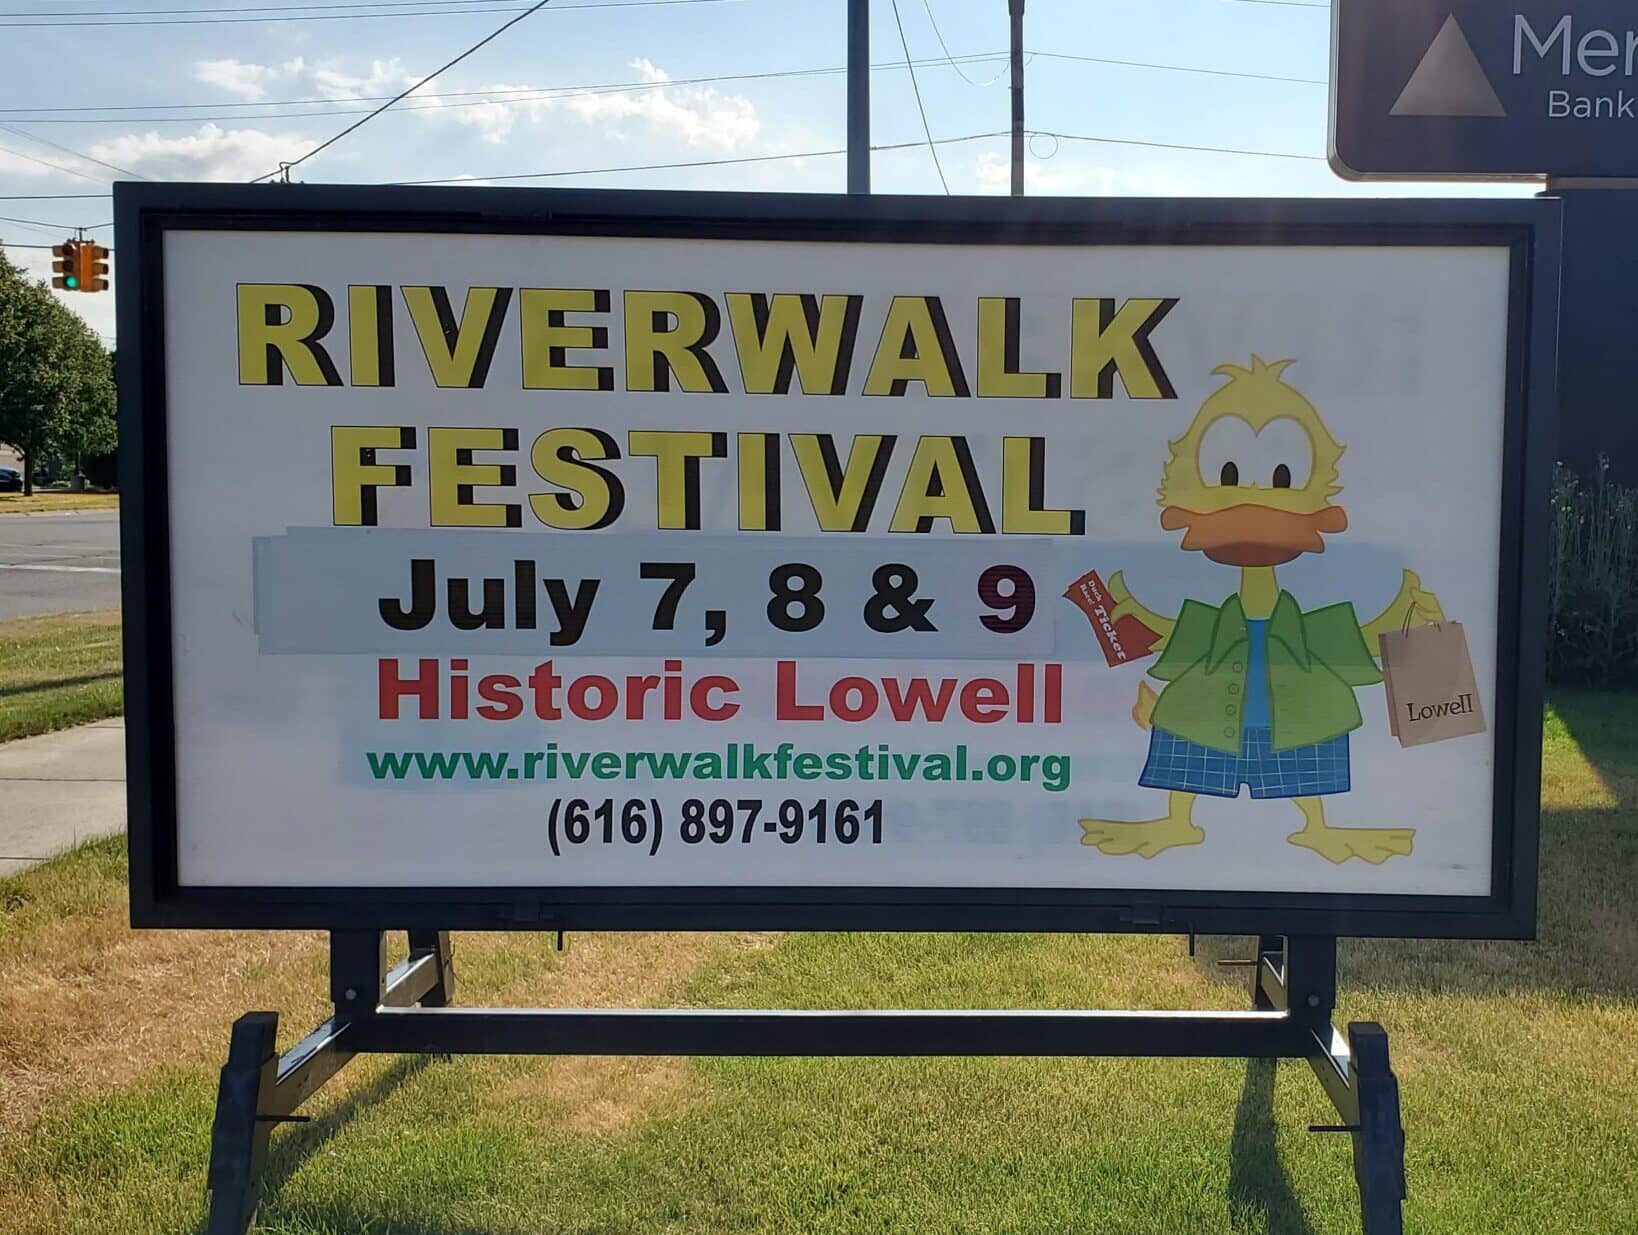 Riverwalk Festival is Back with 3 Days of Fun Lowell's First Look